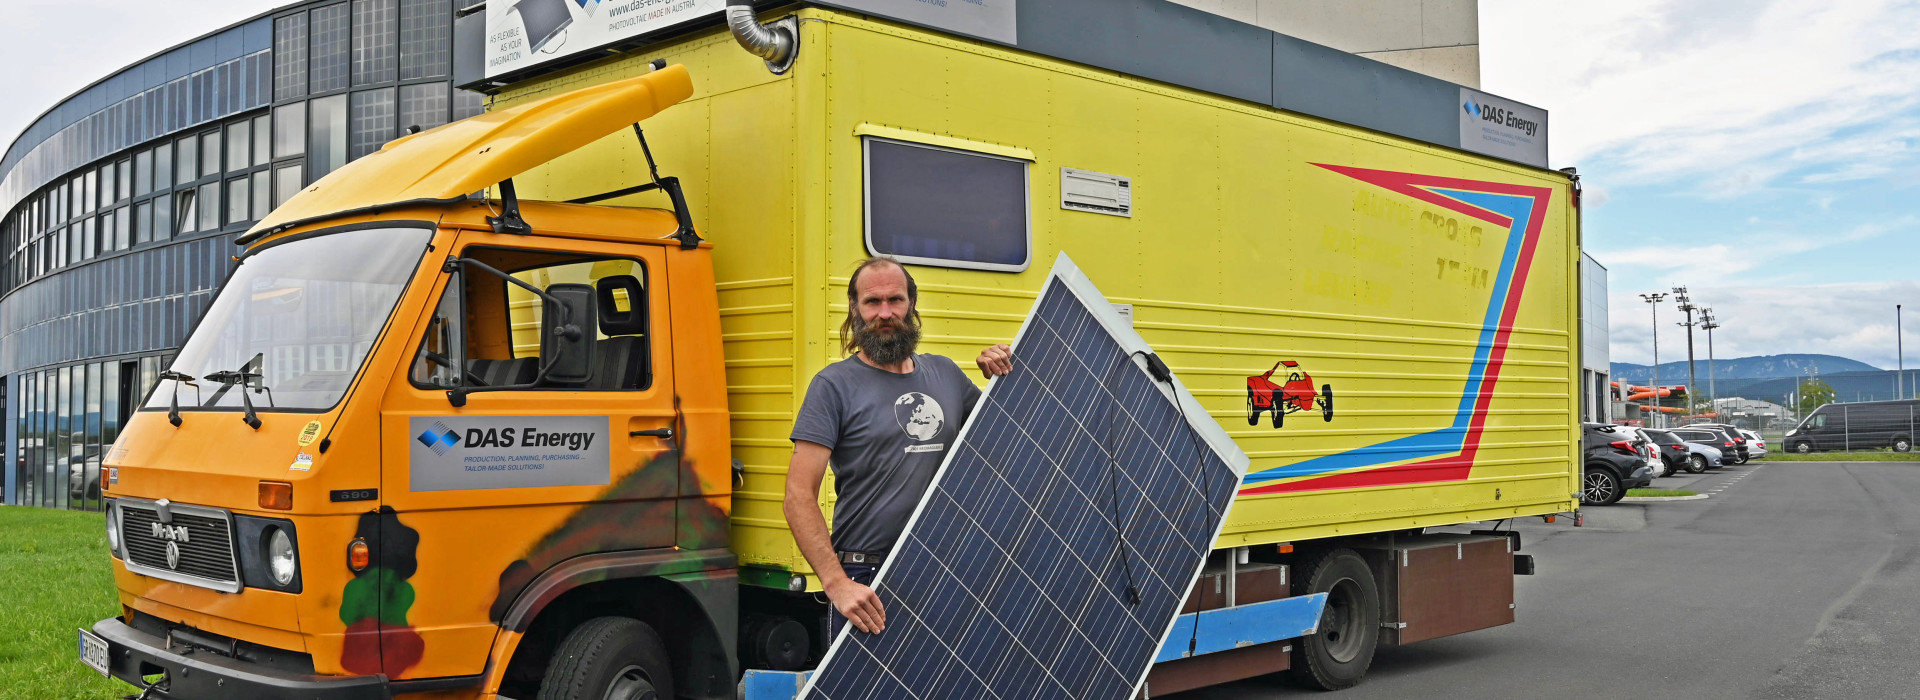 DAS Energy supports the social educational association 'Natur Tier Mensch' with solar energy